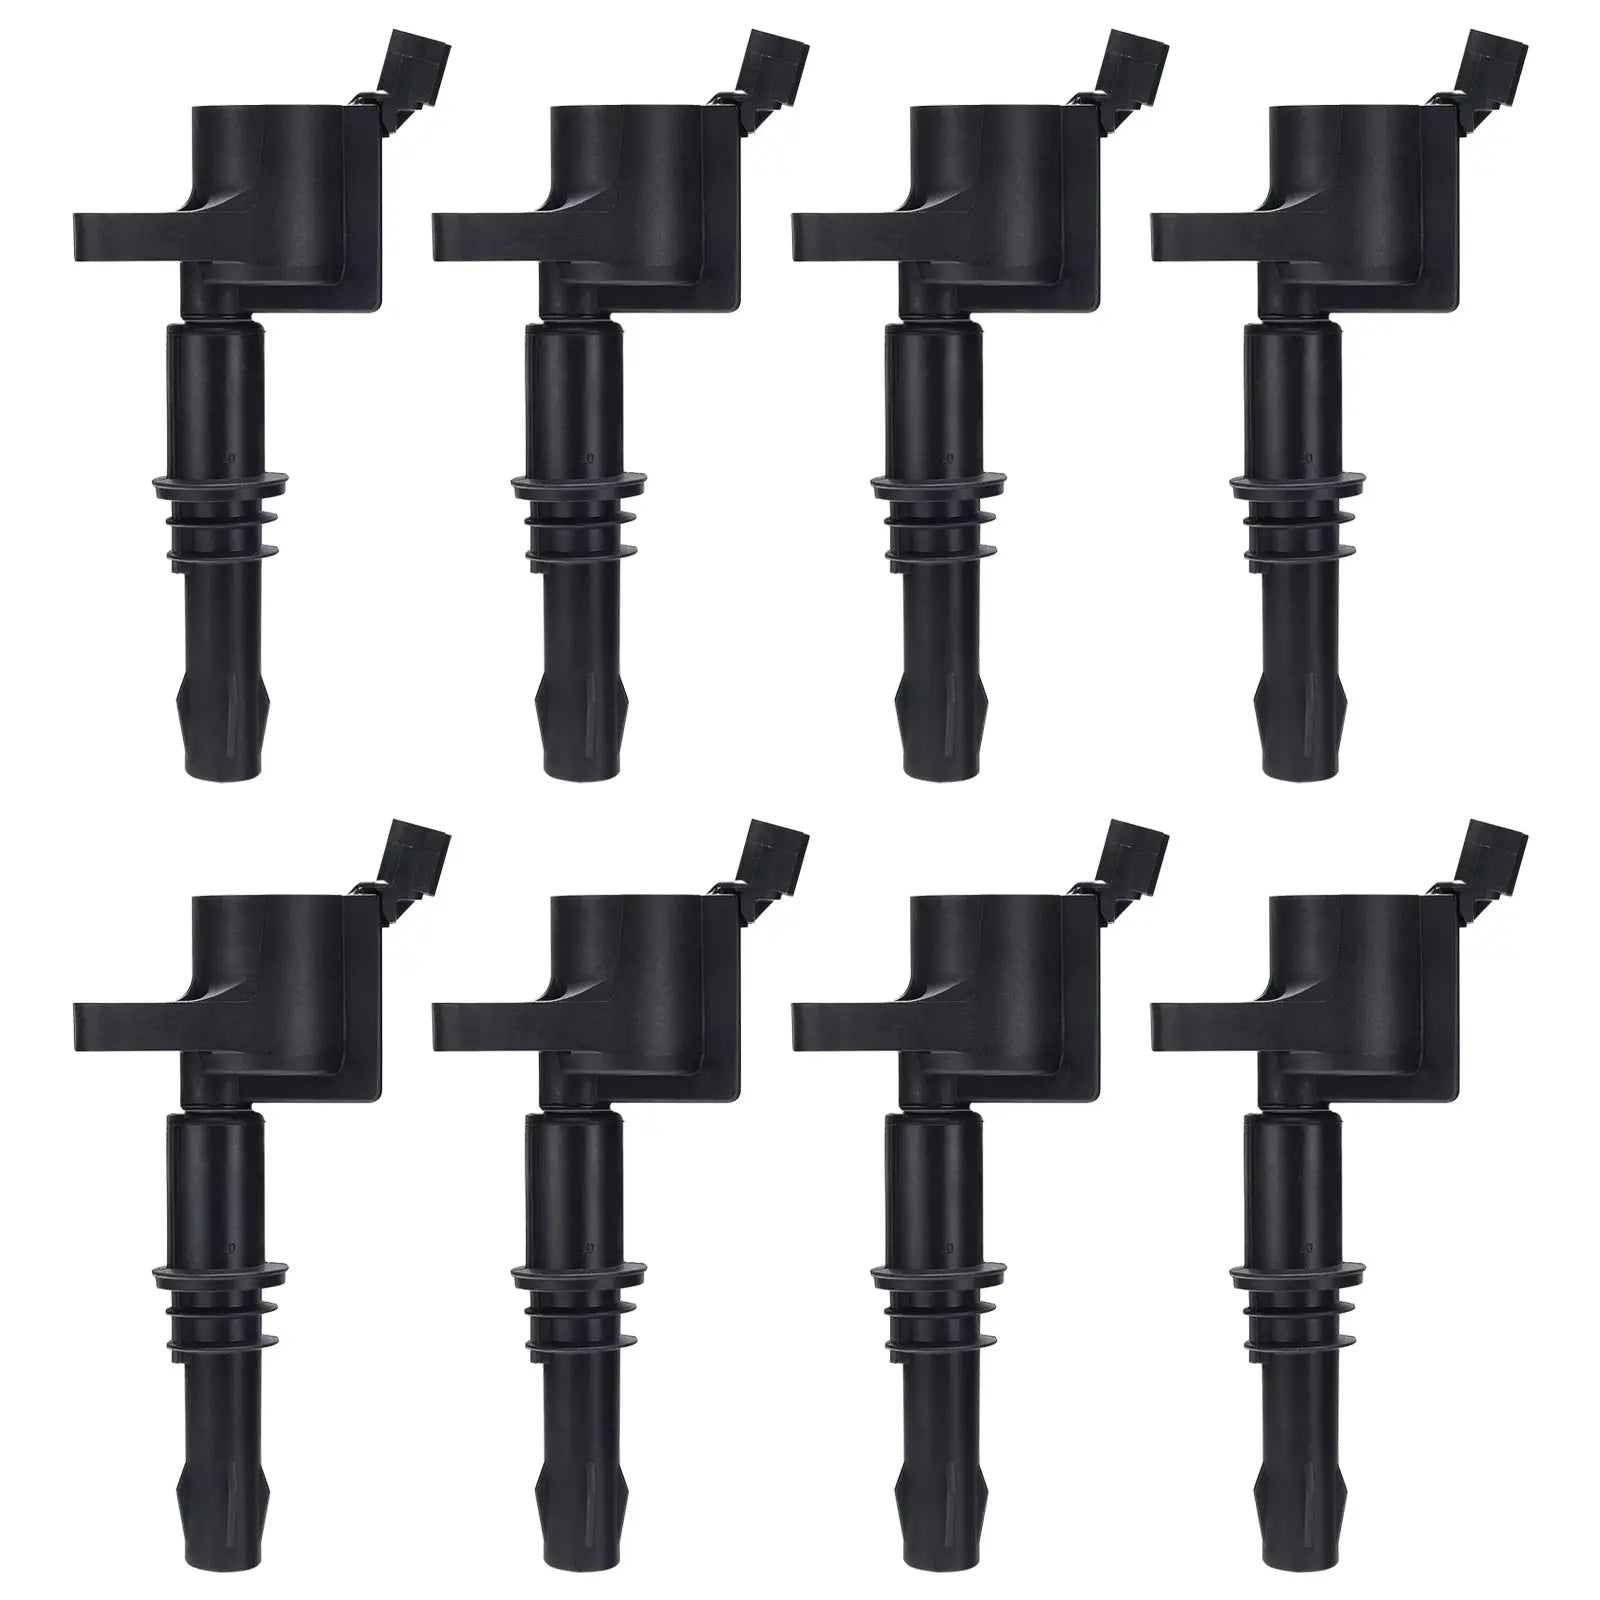 Ignition Coil Pack for 2005-2008 Ford F150 Truck F250 Super Duty Truck Lincoln Mercury V8 V10 4.6L 5.4L 6.8L 5C1584 E508 DG511 C1659 C1541 FD508 8PCS Flashark